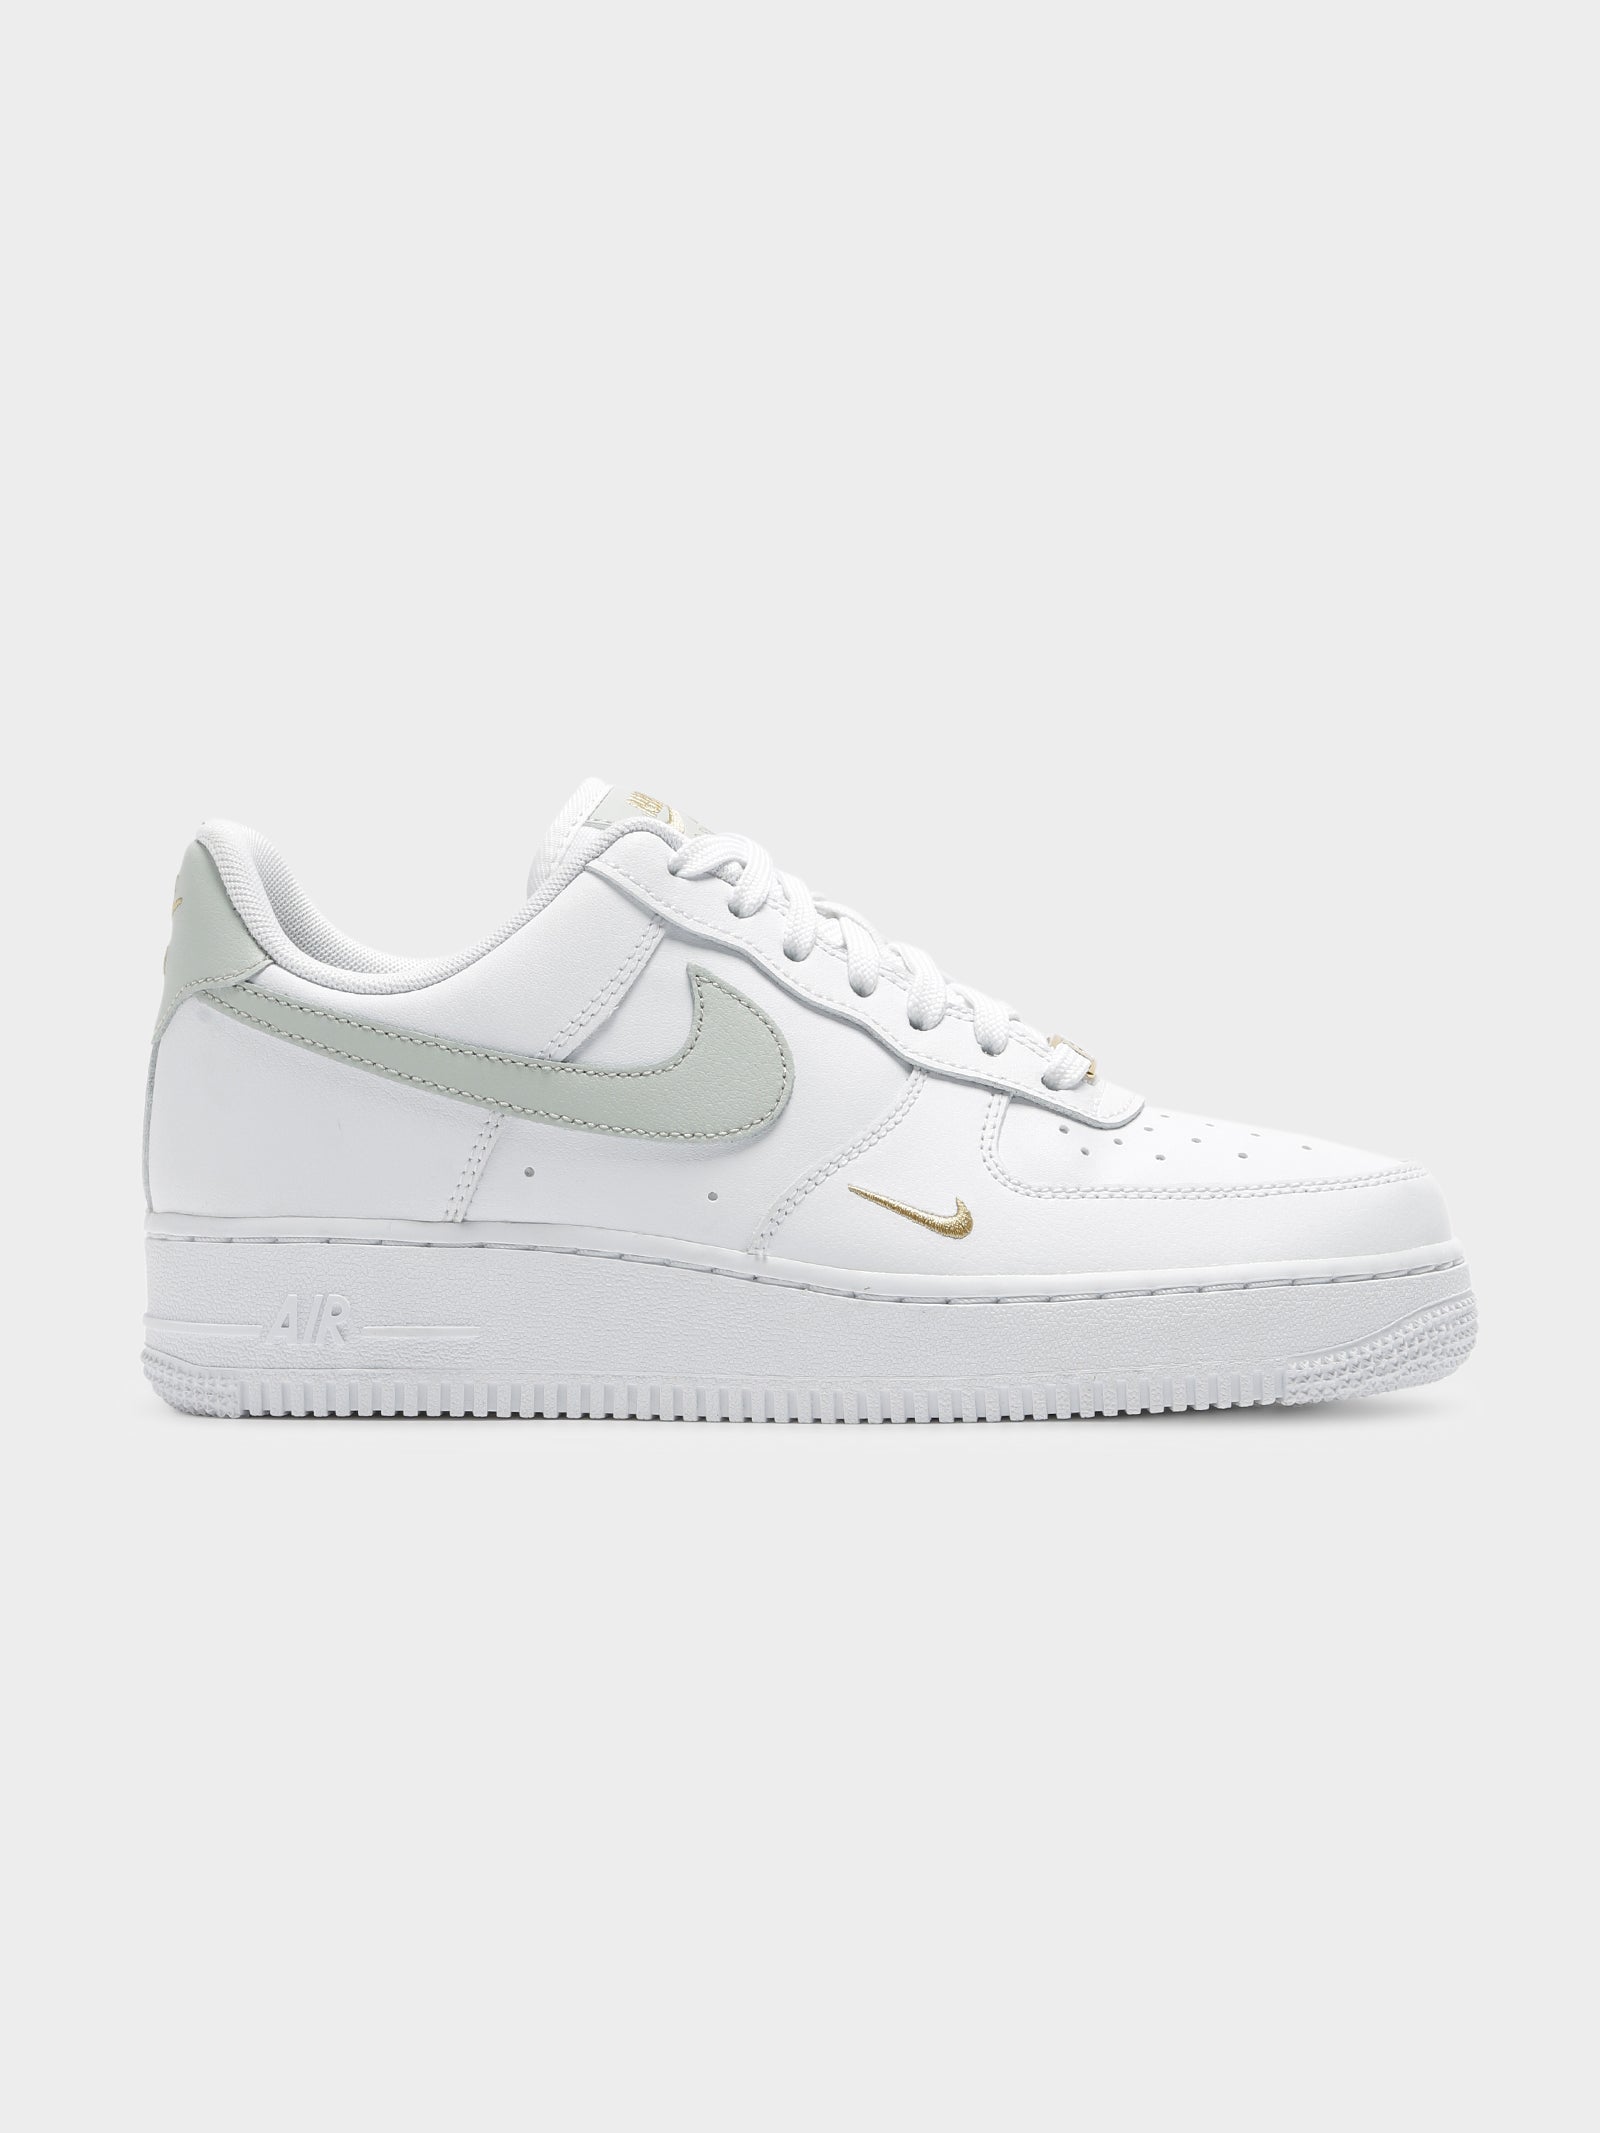 women's white and grey air force 1